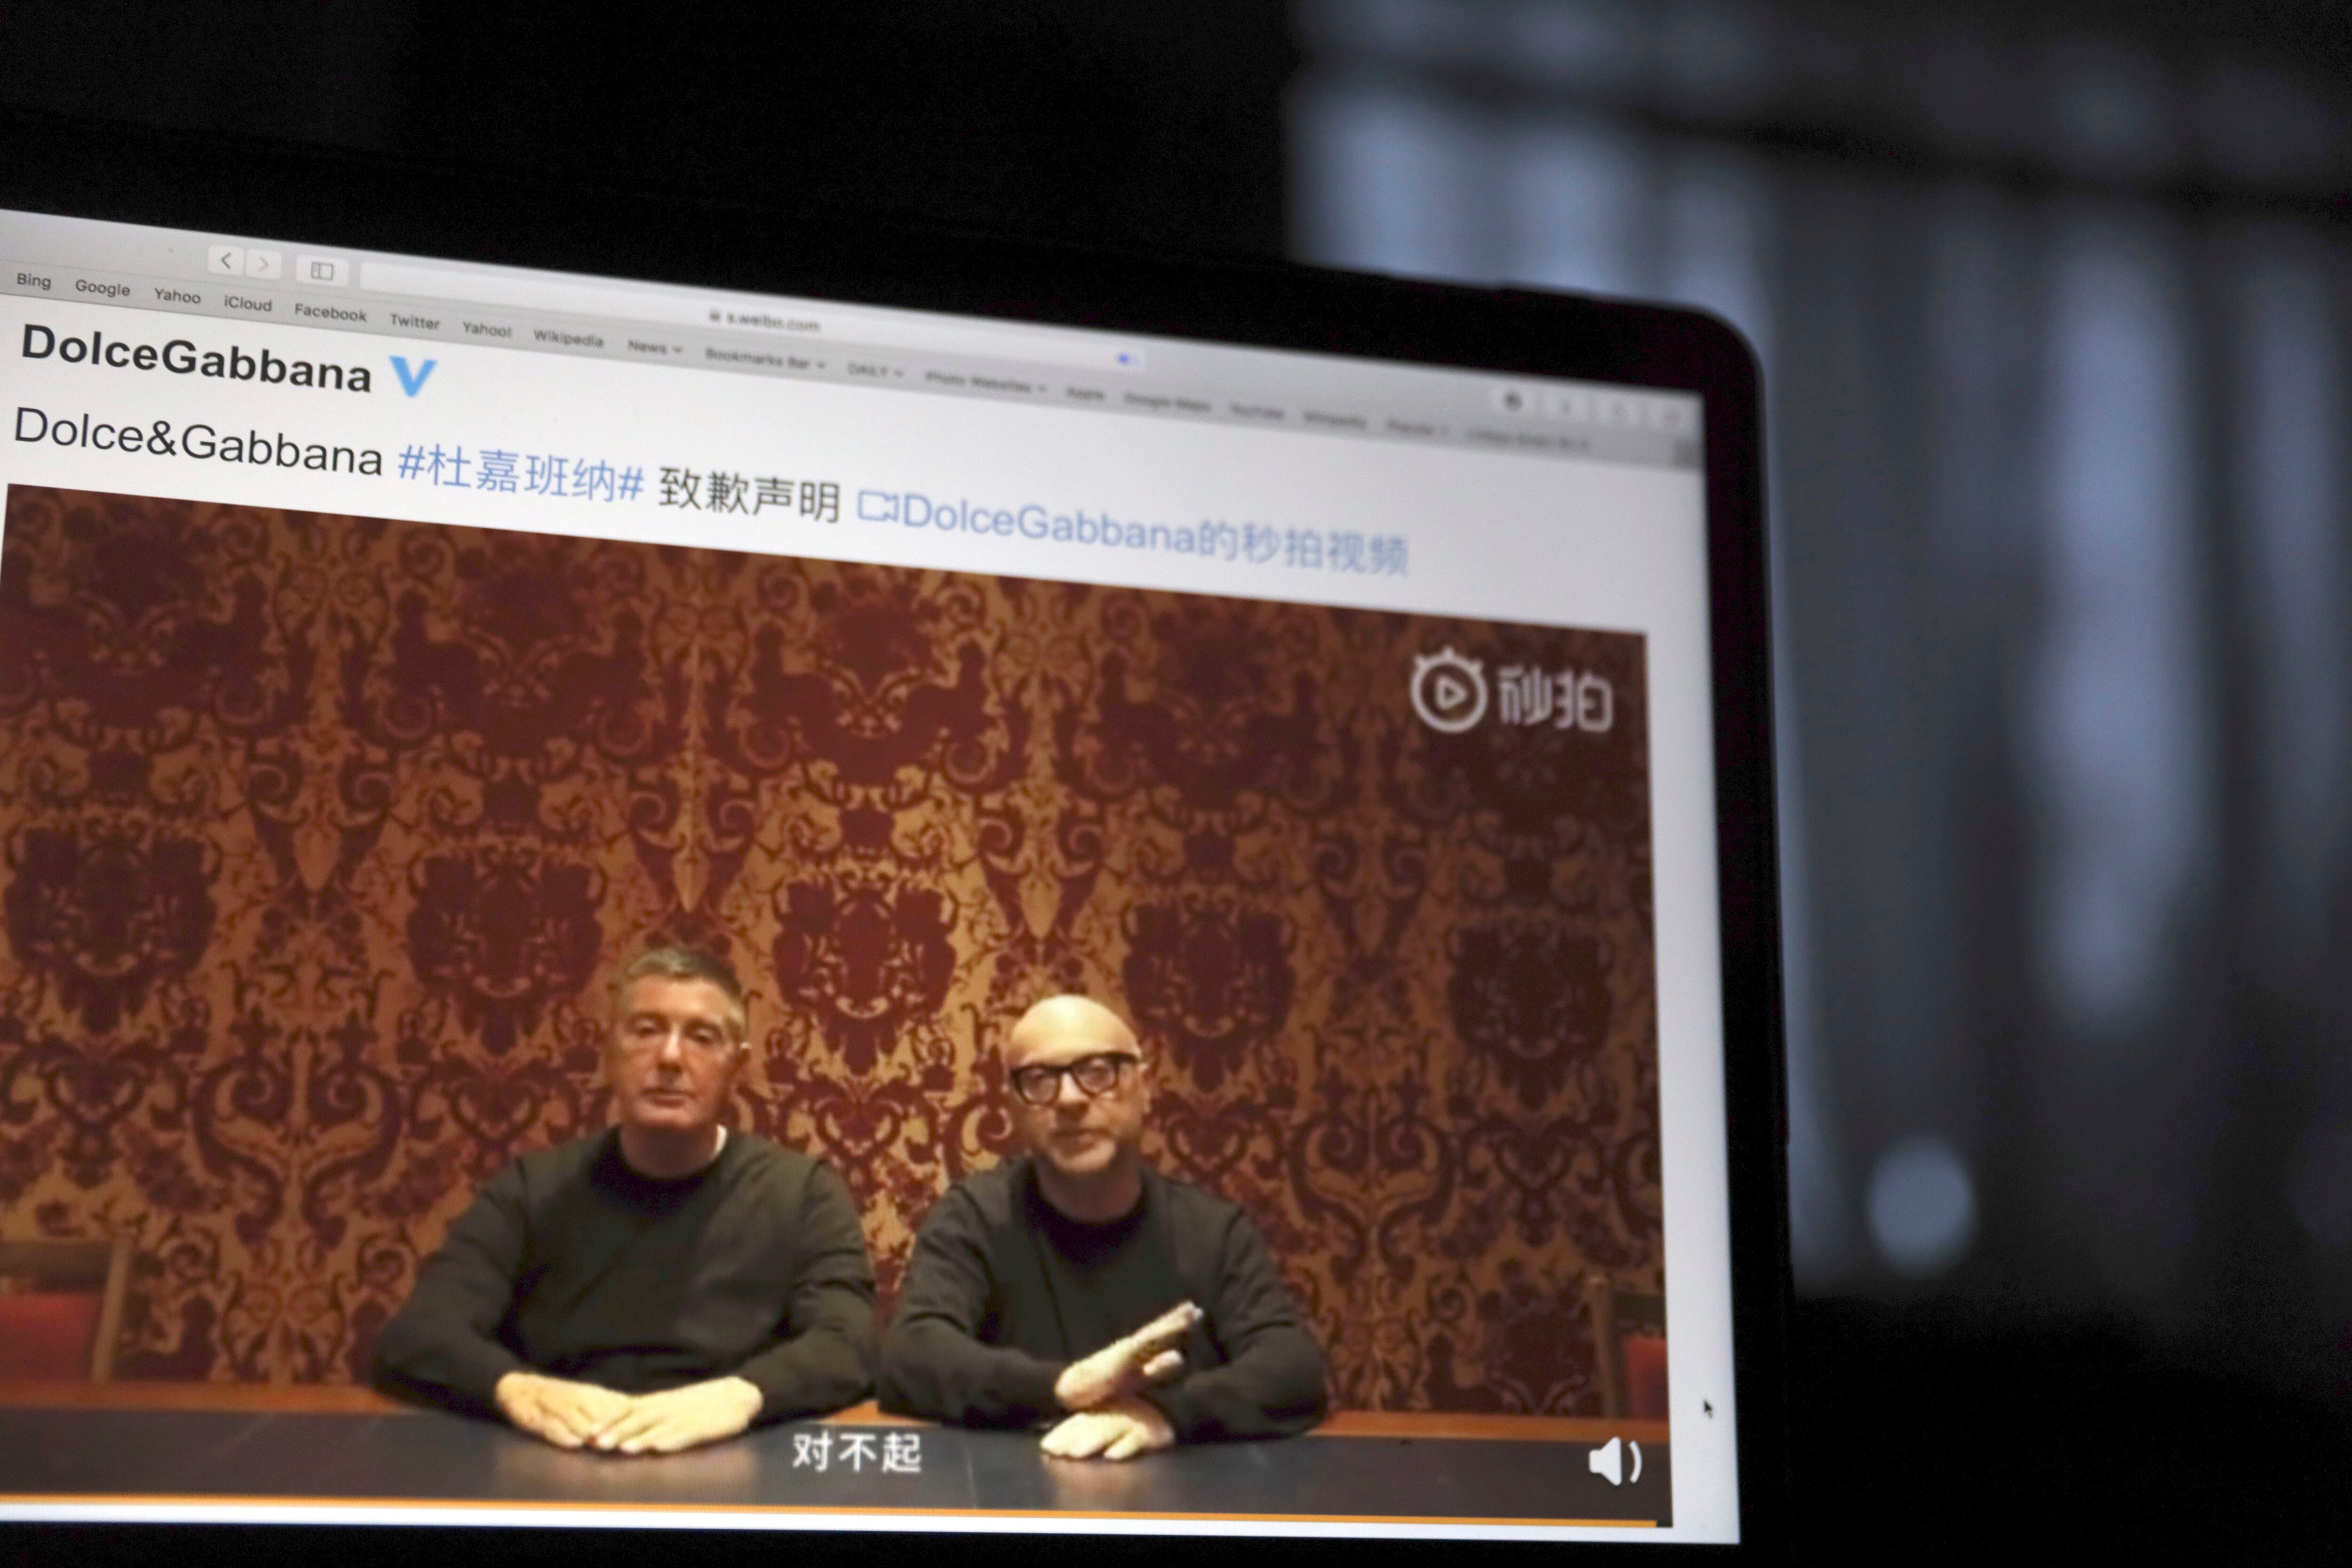 Dolce&Gabbana seeks over $600M damages from 2 US bloggers